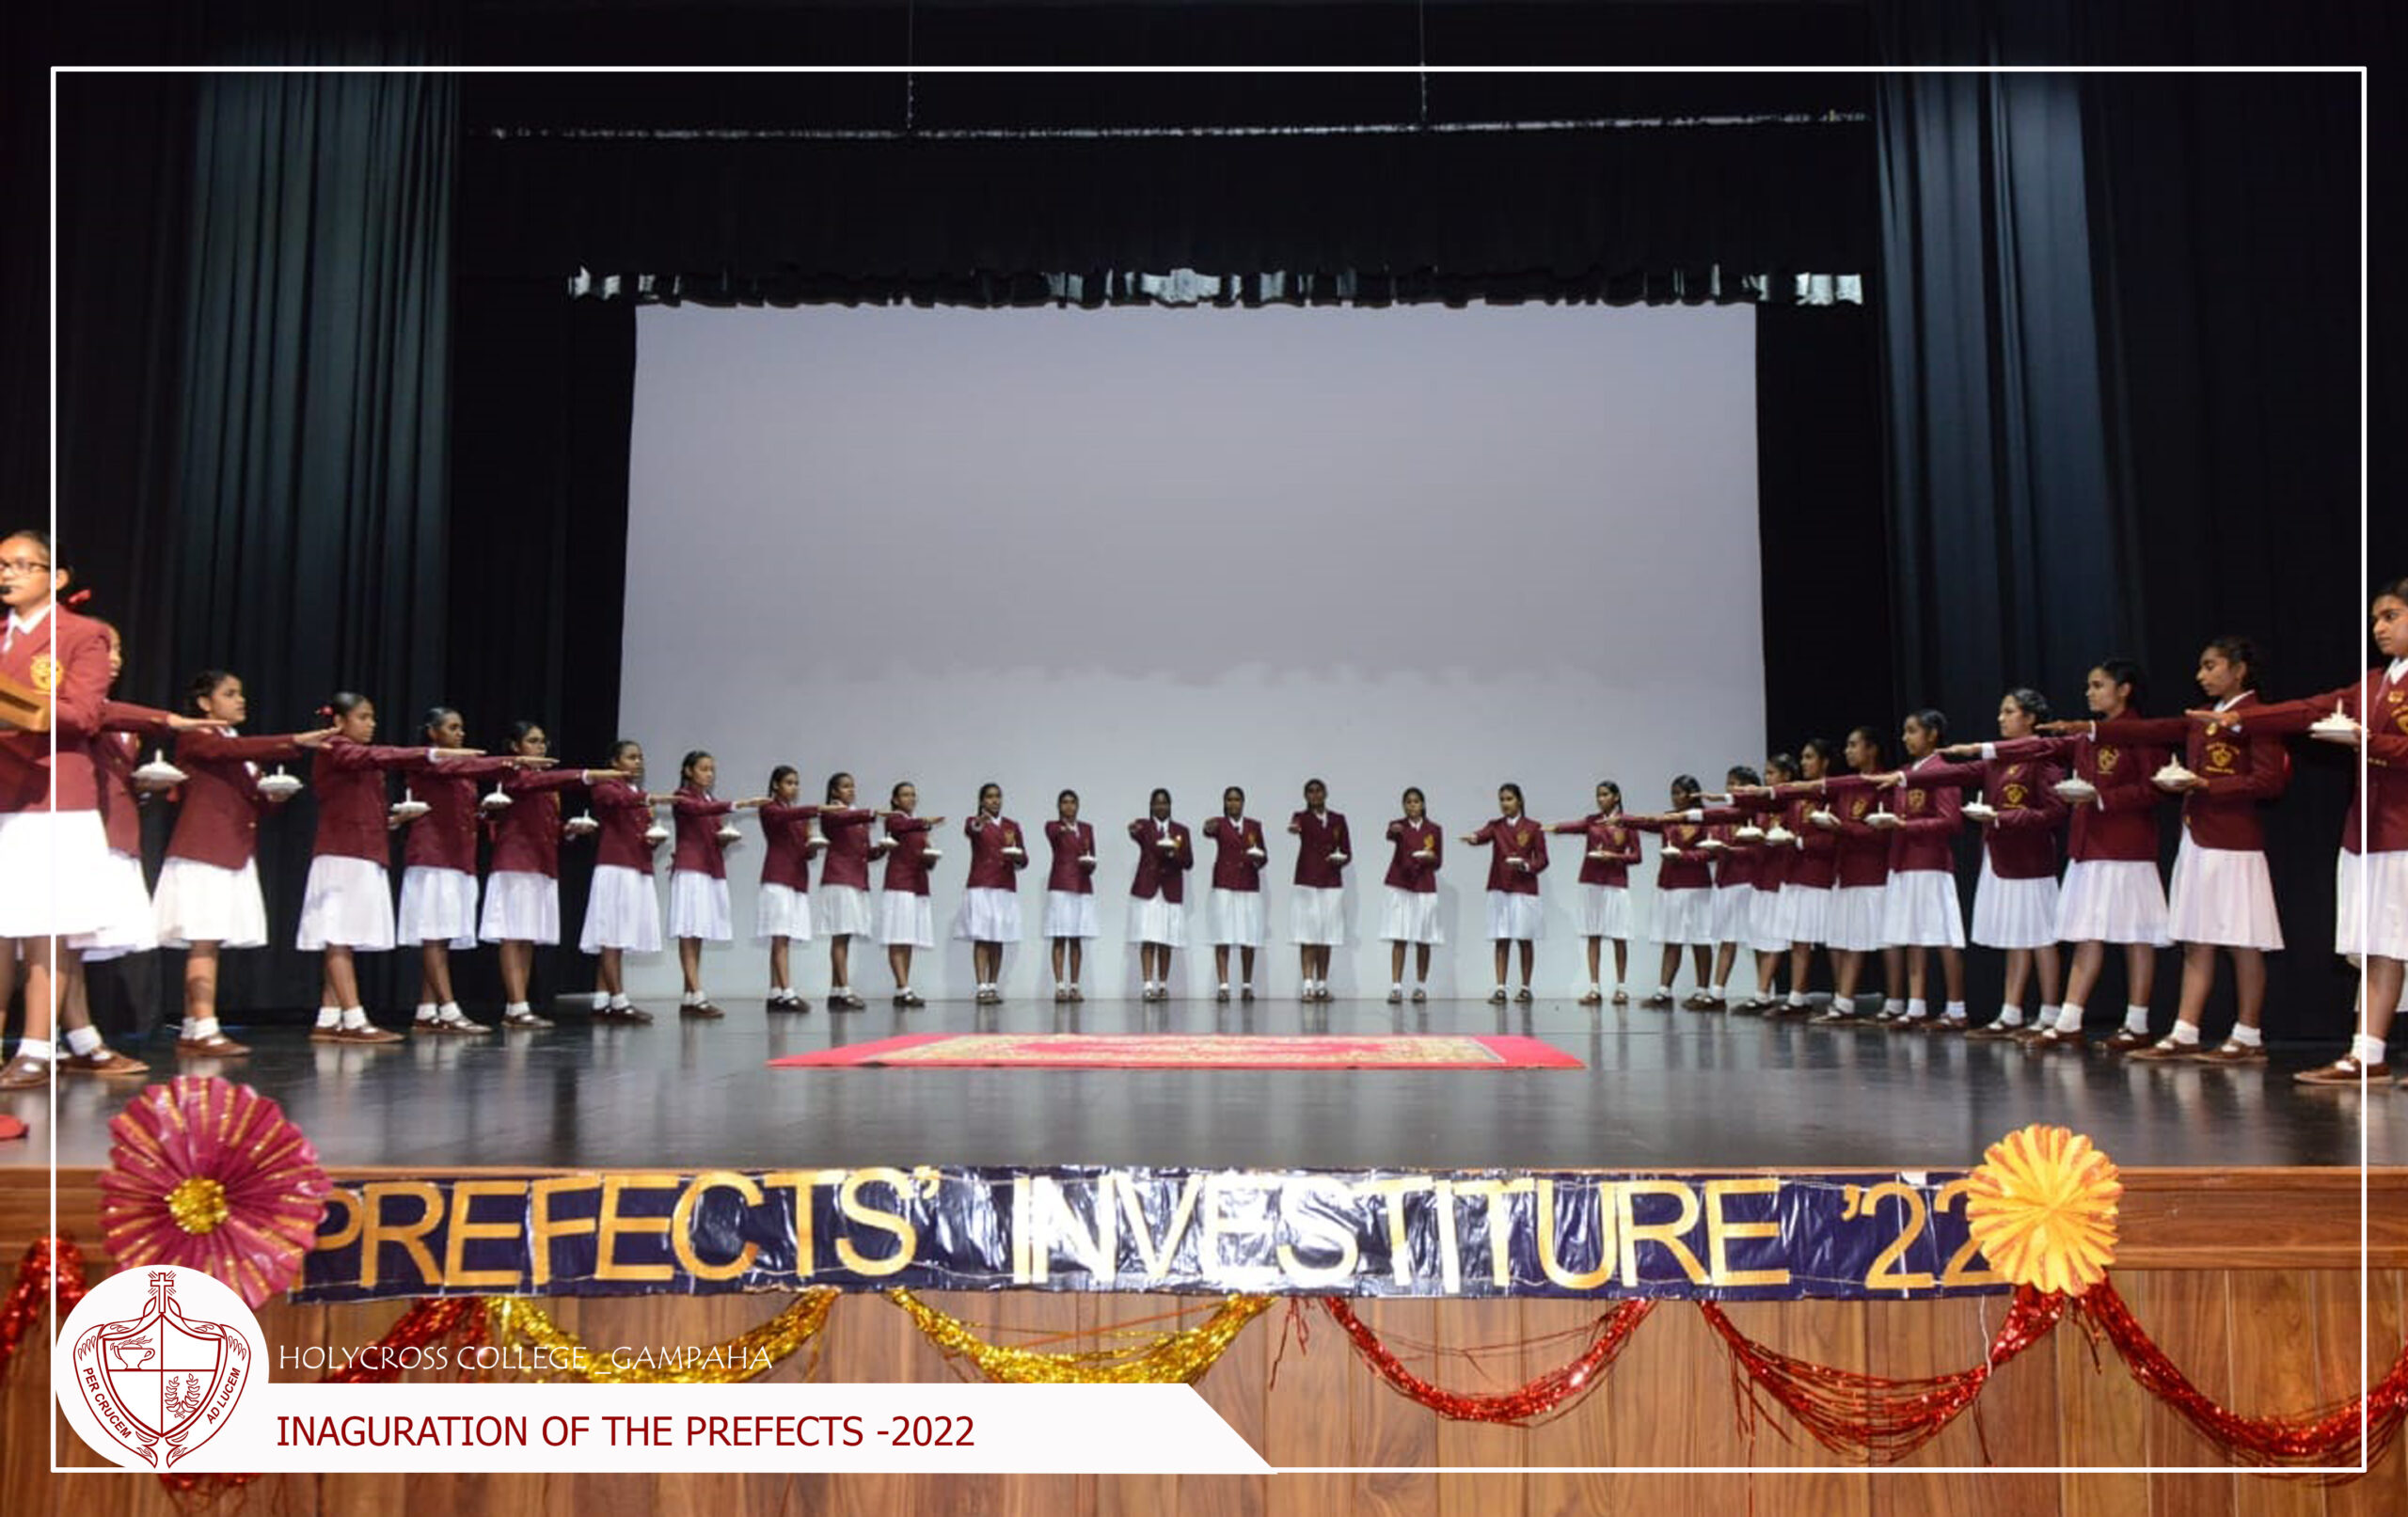 Inauguration of the Prefects 2022